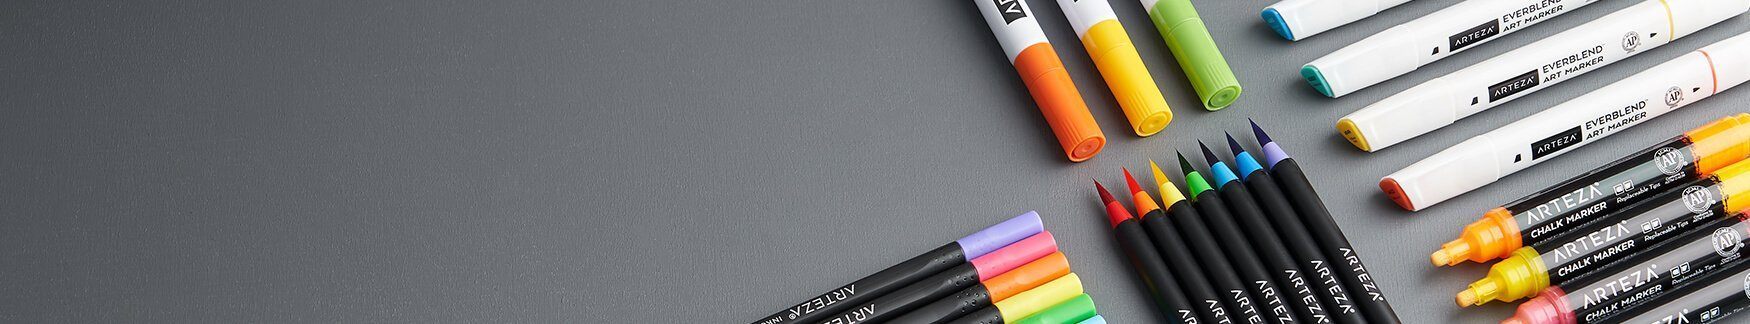 Tomshine 36 Color Ink Pens Retractable Water Base Quick-dry 0.6mm Fiber Pen  Gift Scrapbooks Tool Journaling Writing Art Painting Birthday Card for